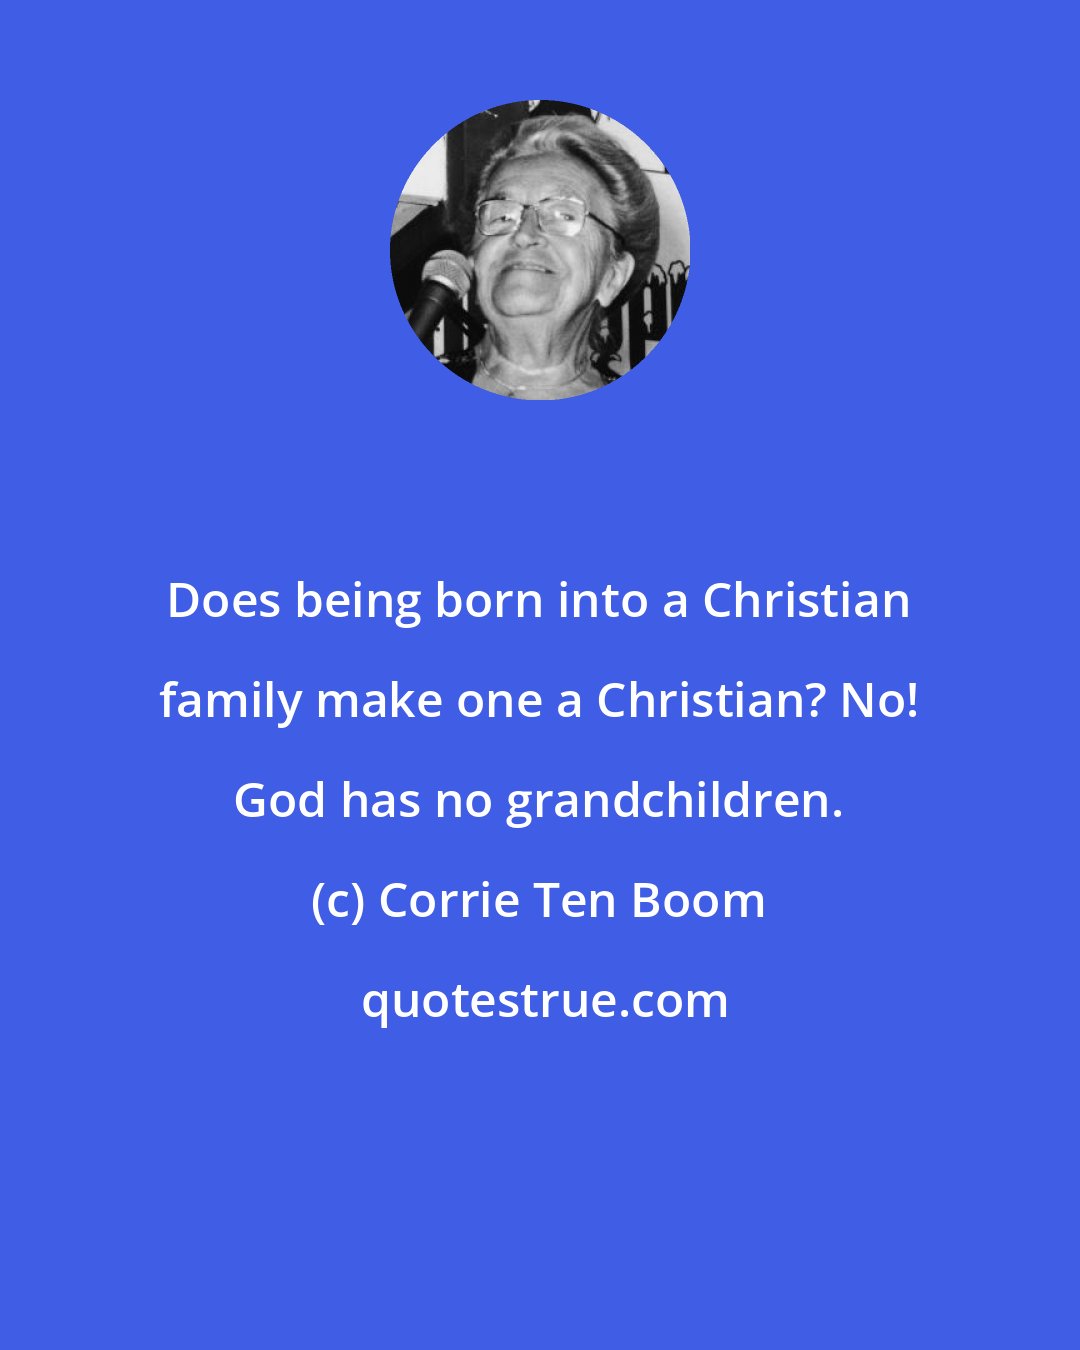 Corrie Ten Boom: Does being born into a Christian family make one a Christian? No! God has no grandchildren.